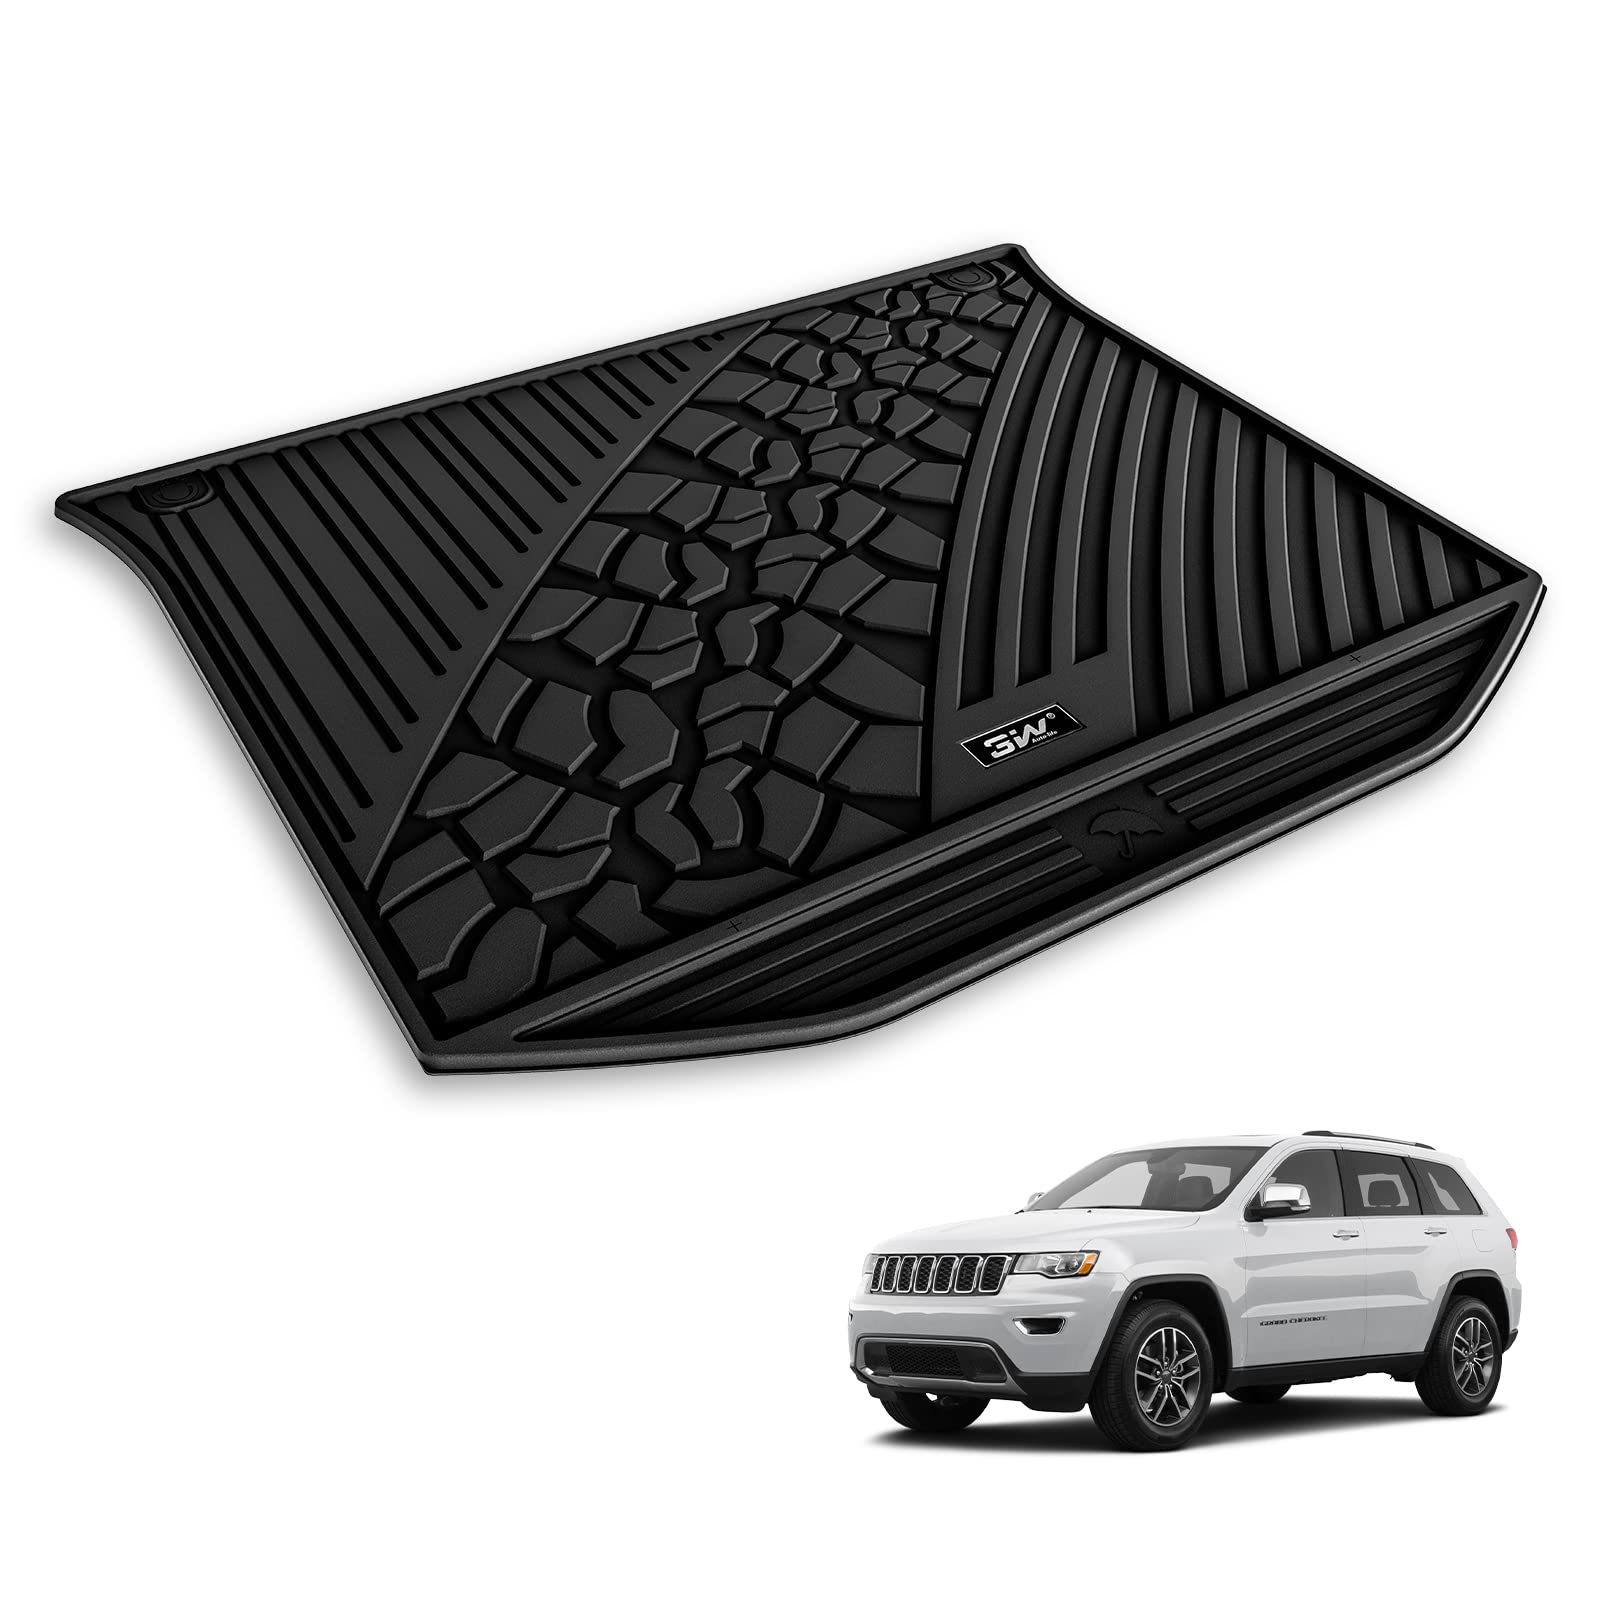 3W Jeep Grand Cherokee 2013-2015 (Non L or WK) Custom Floor Mat Trunk Mat TPE Material & All-Weather Protection Vehicles & Parts 3W 2013-2015 Grand Cherokee 2013-2015 Trunk Mat